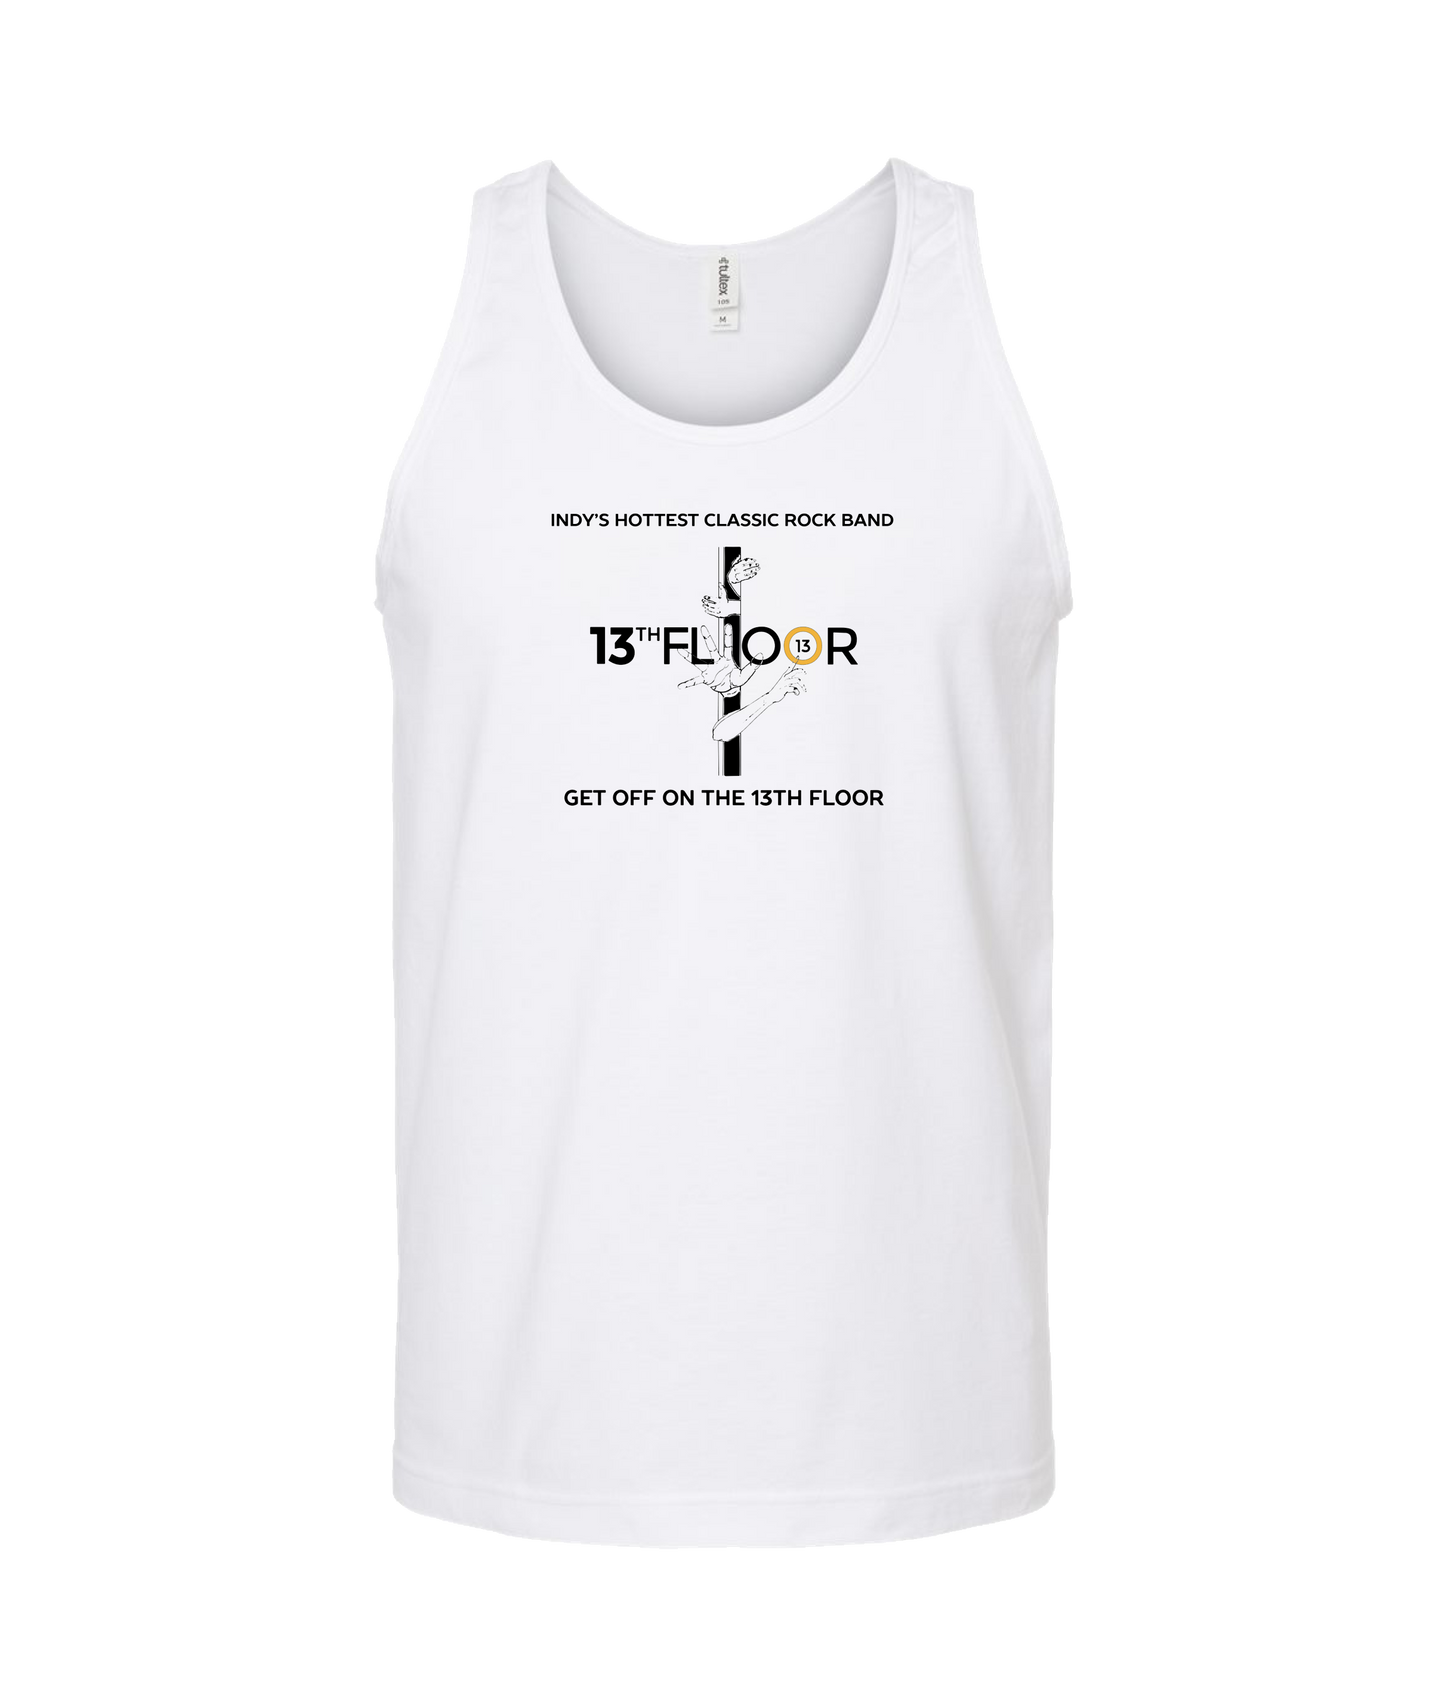 13th Floor Band Indy - Get Off on the 13th Floor - White Tank Top